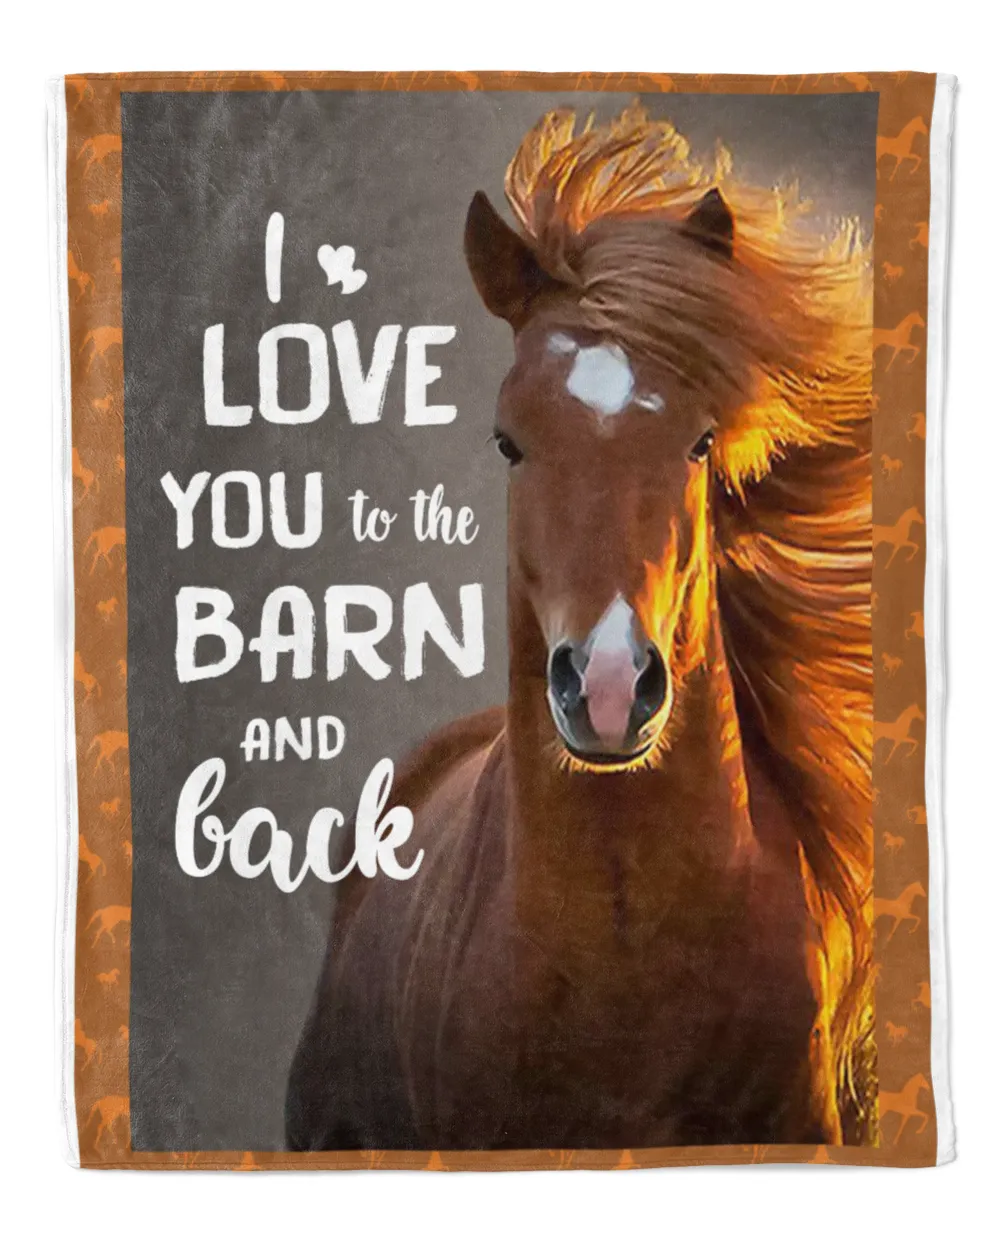 [Horses]HORSE - I LOVE YOU TO THE BARN AND BACKart